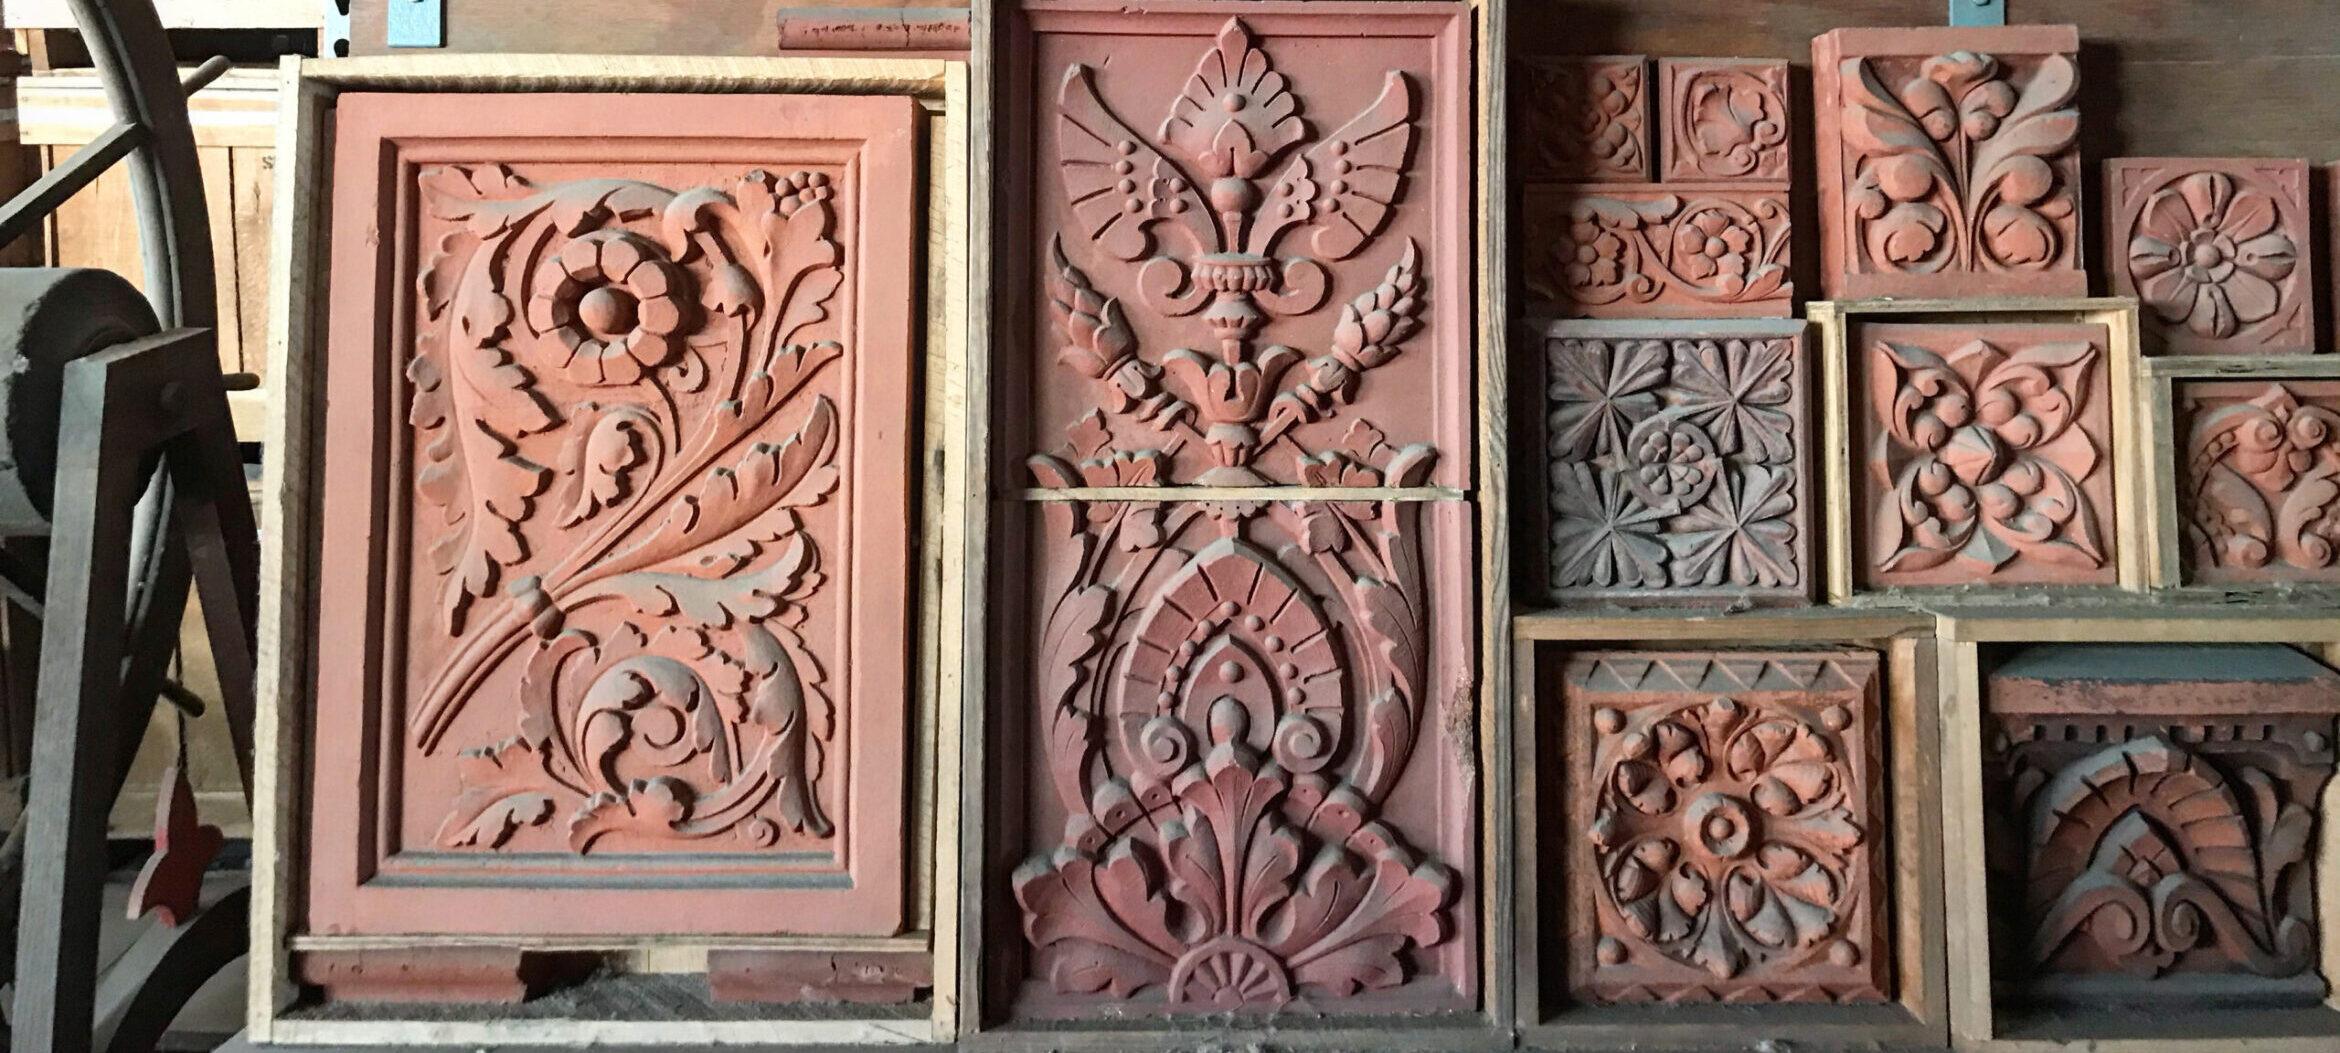 Terra cotta panels with floral designs